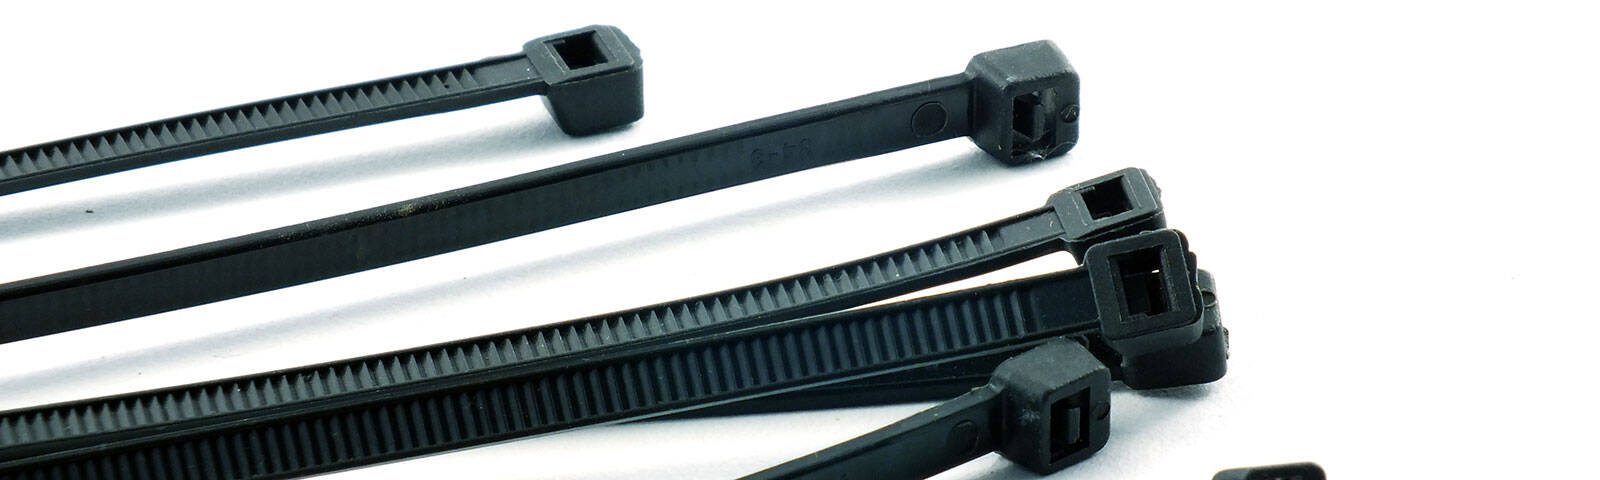 Common types of cable tie